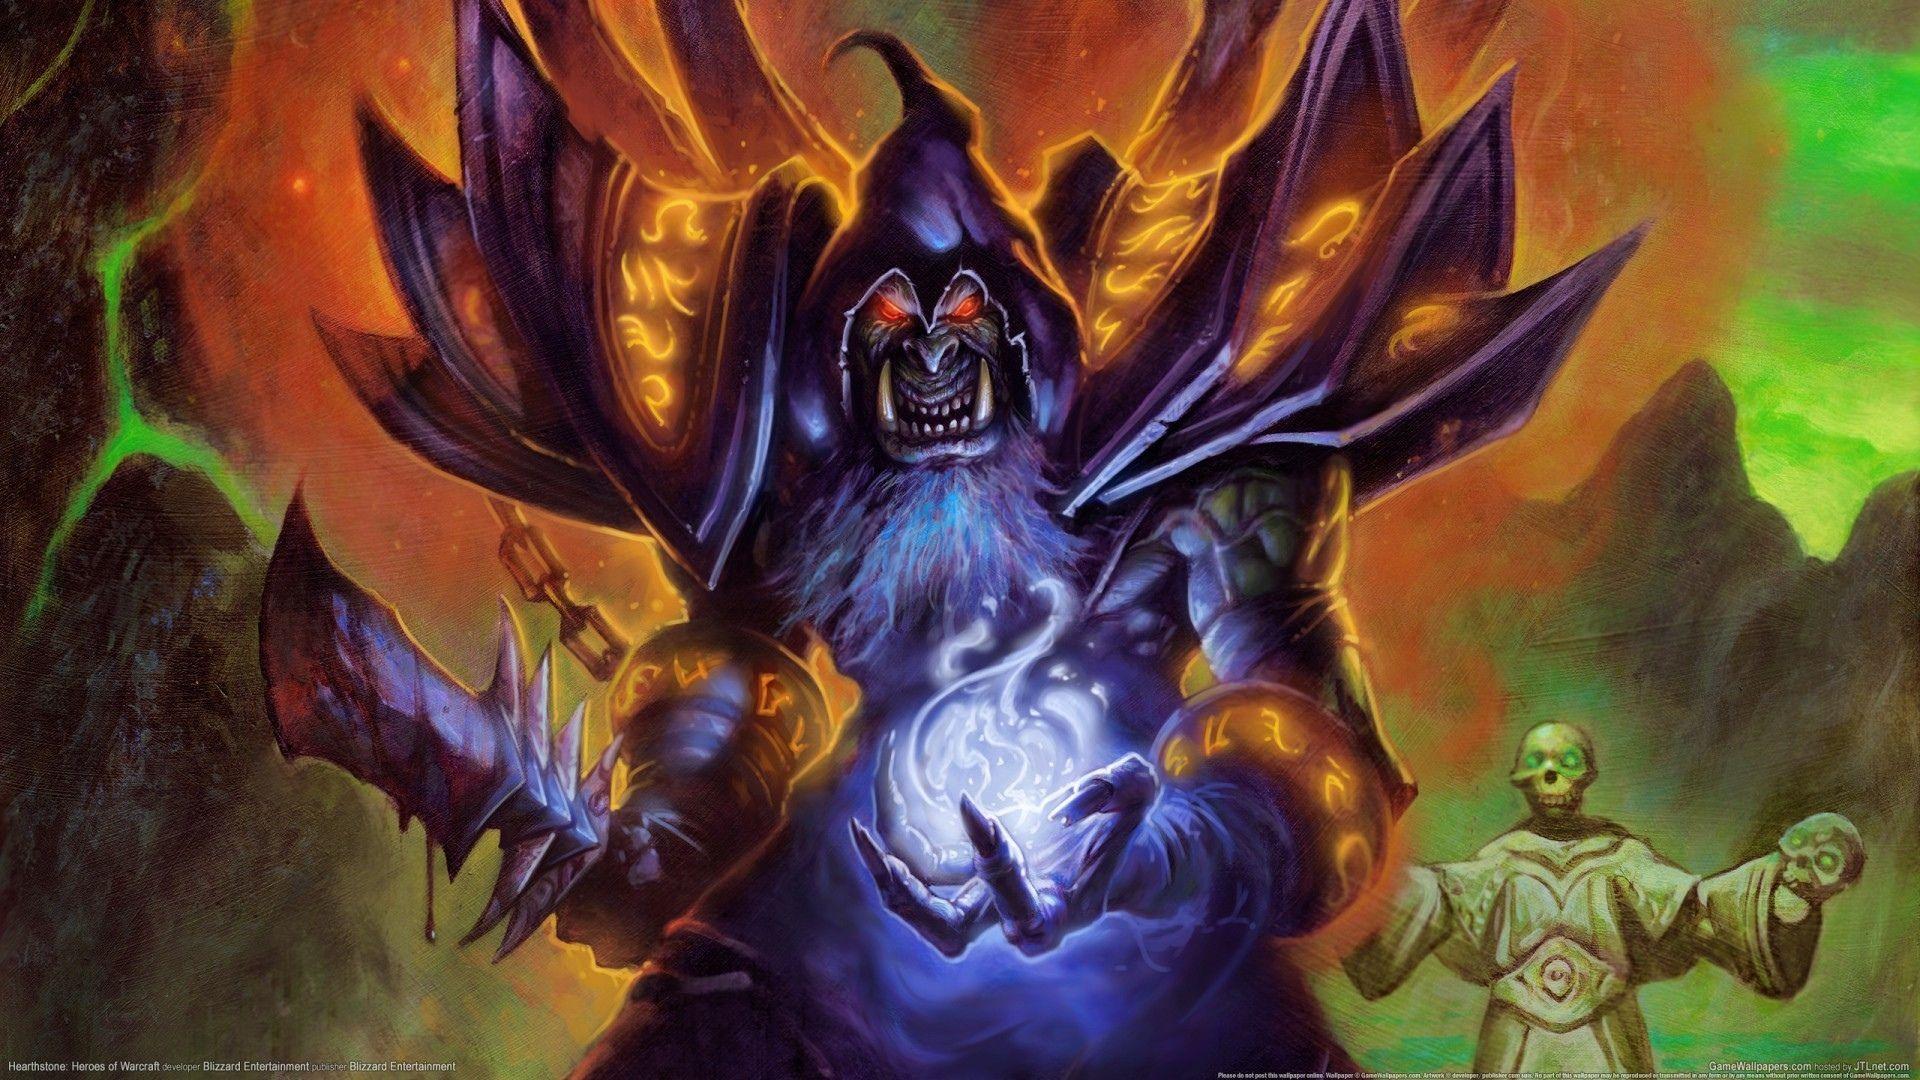 hearthstone wallpapers